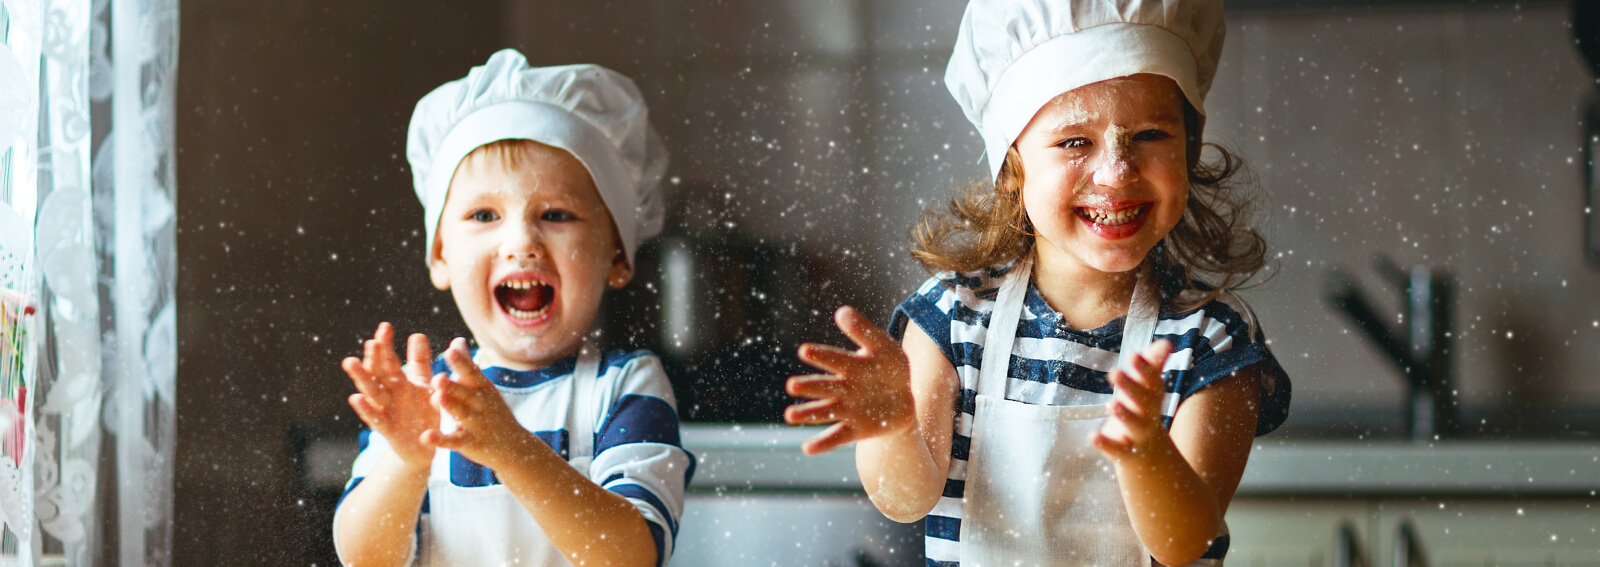 Two kids wearing aprons and chefs hats playing with baking flour